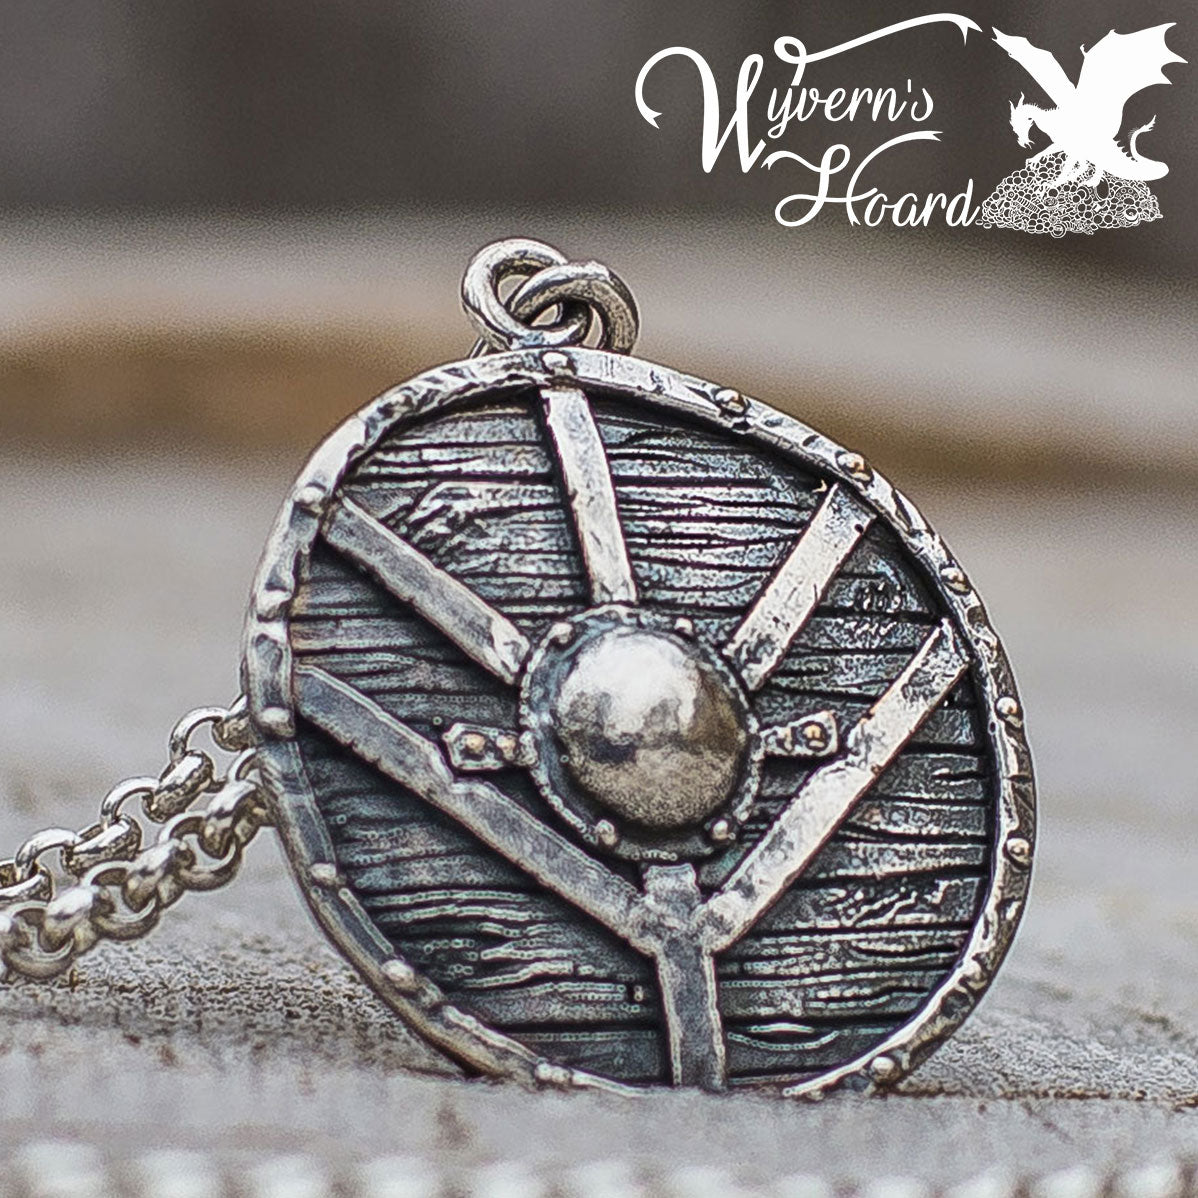 Lagertha's Shield Necklace